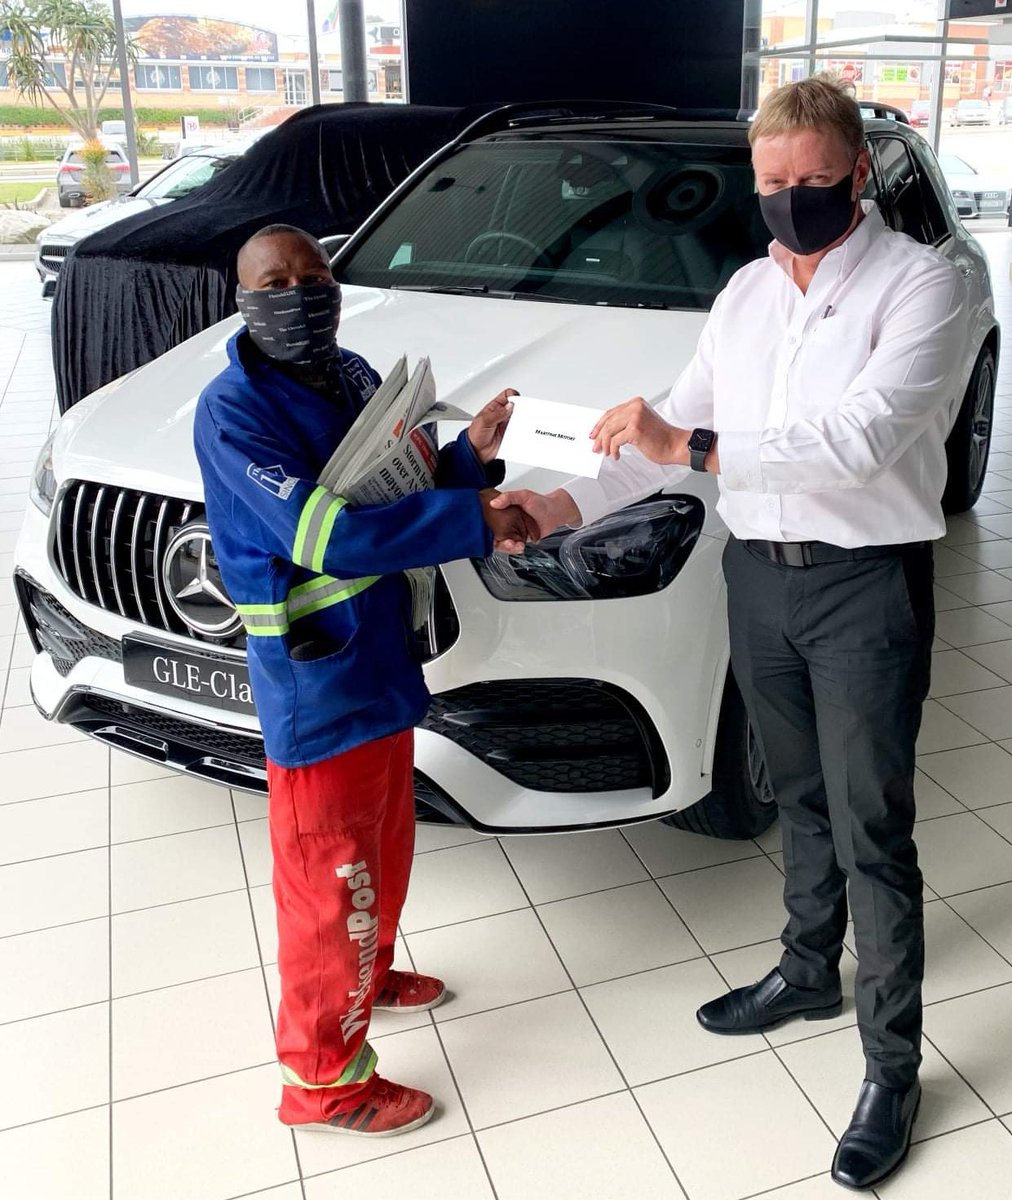 Mercedes-Benz gives Bradley Matthews a reward for stepping in to help with traffic flow during loadshedding on the cnr of William Moffet Expwy & Circular drive 🙌🏾